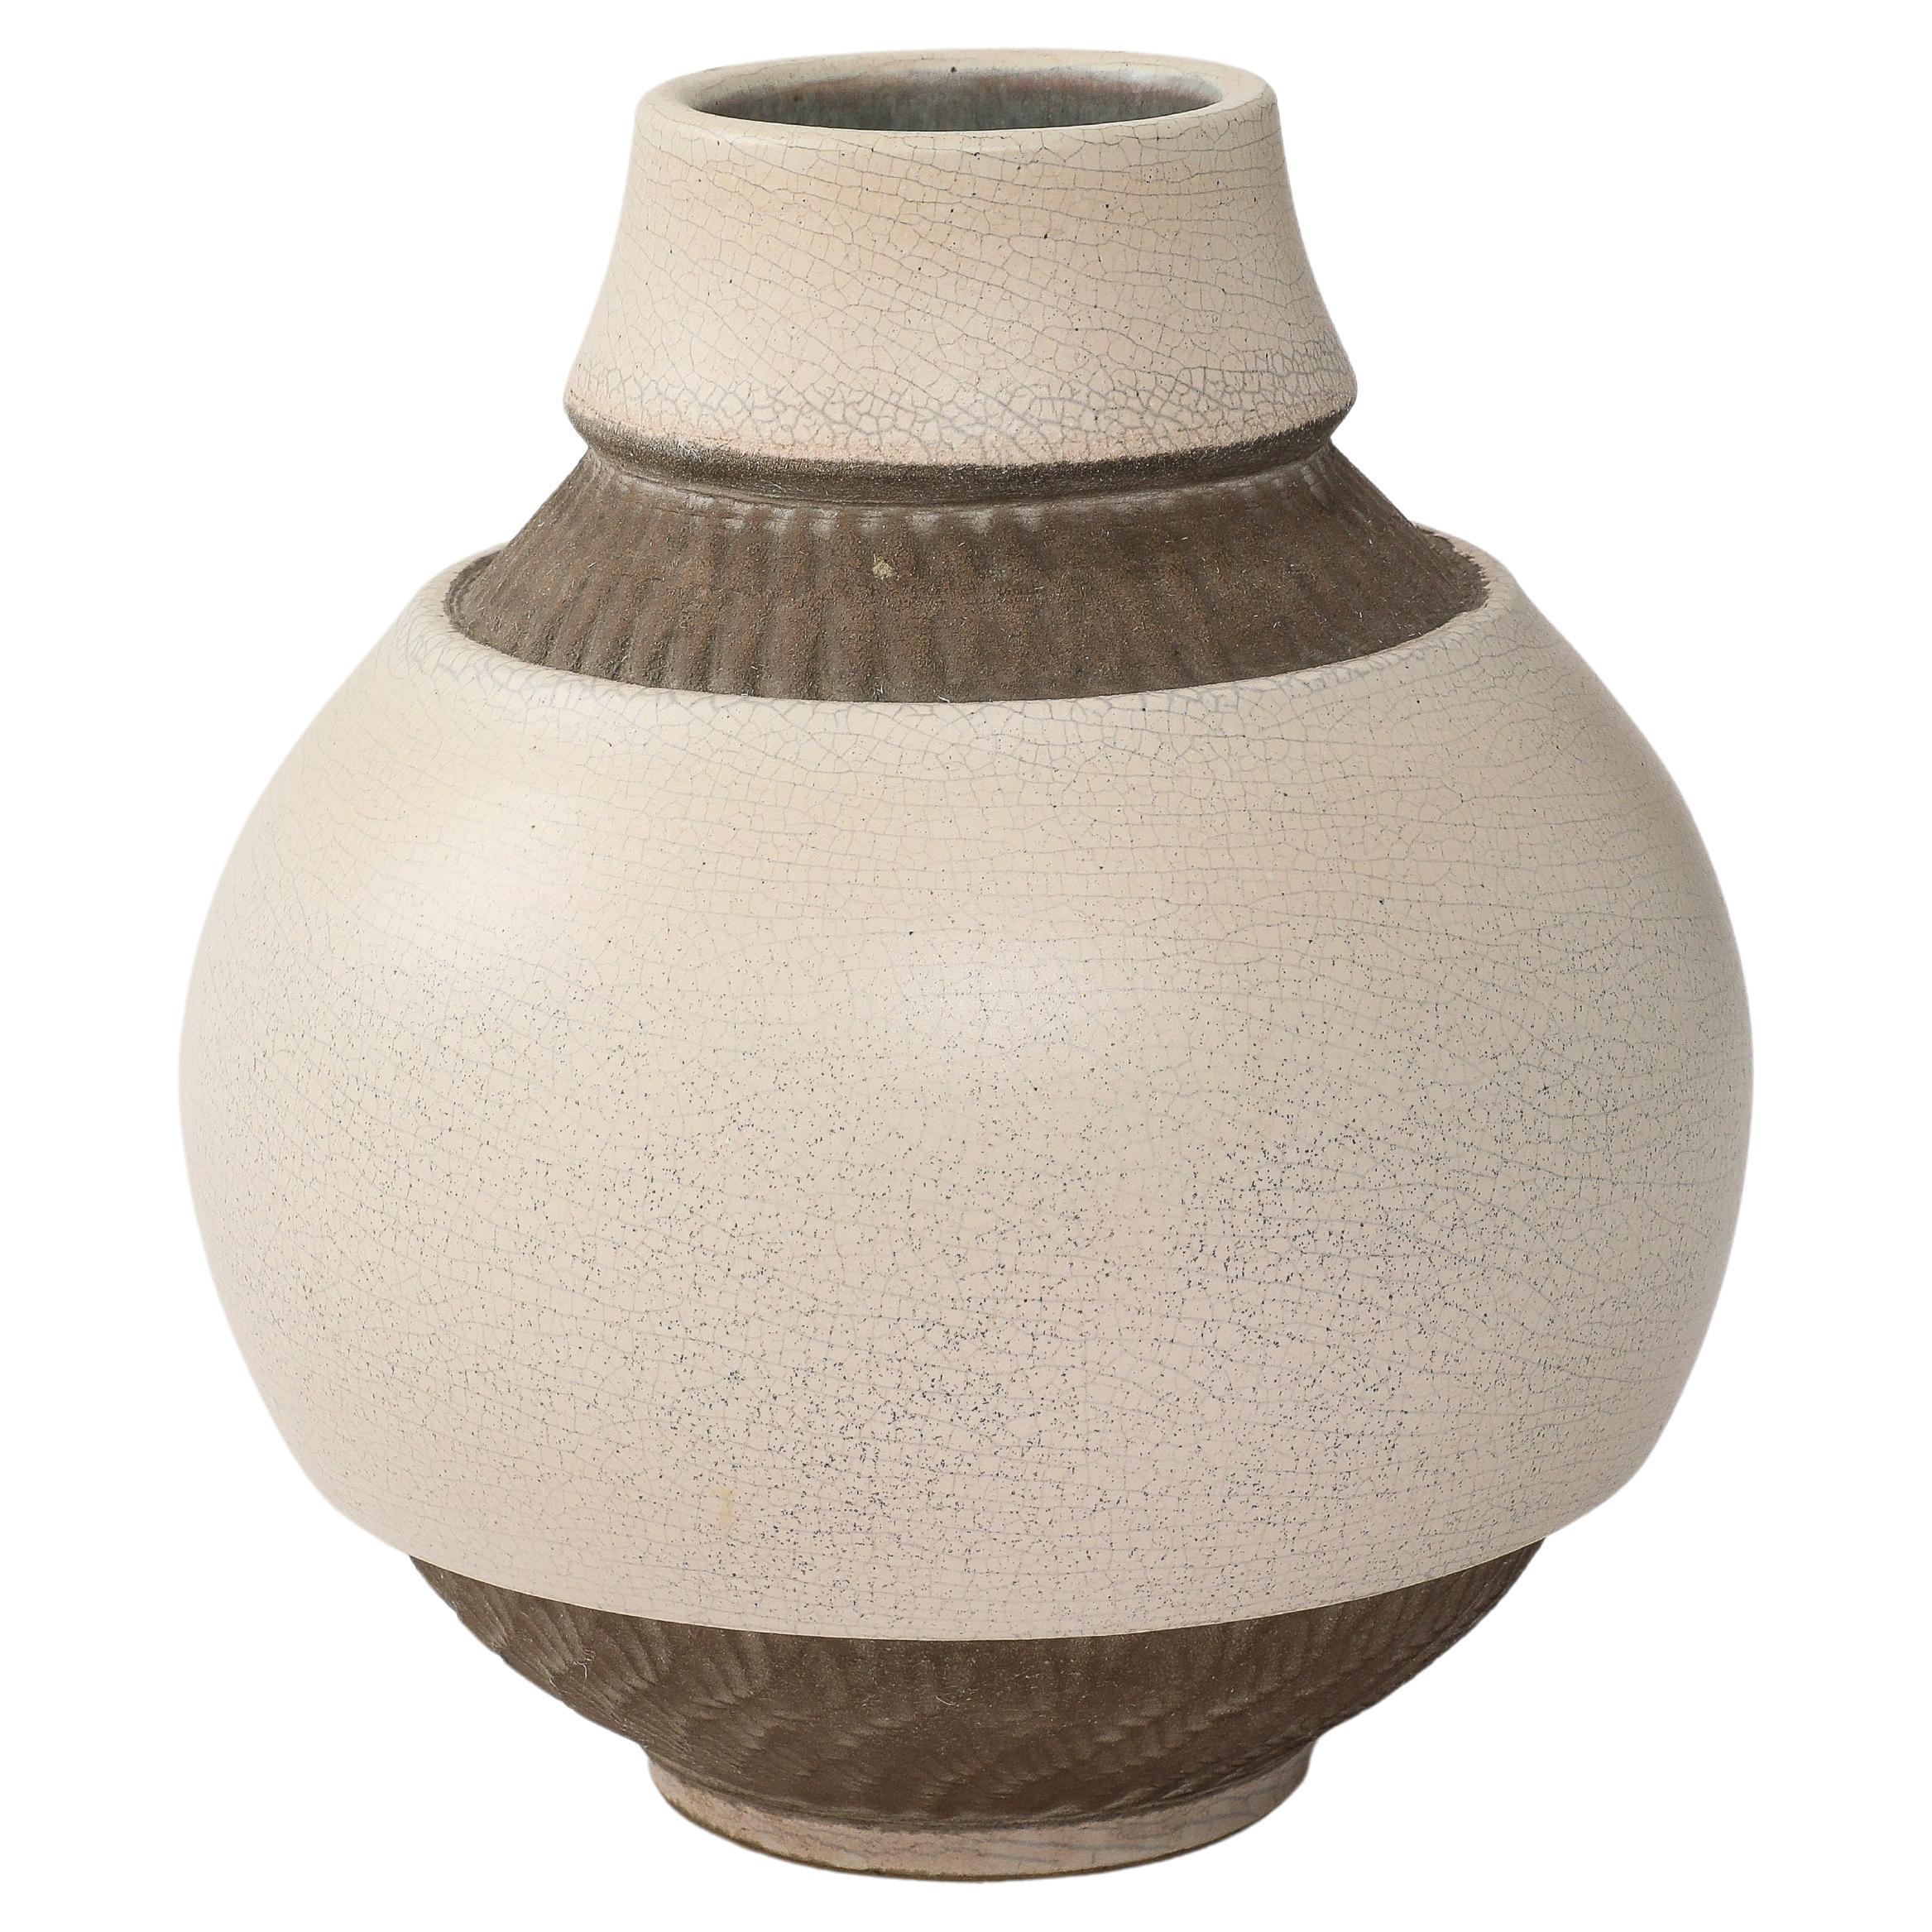 Pol Chambost Off-White Crackle Vase, Brown Incised Bands, Frankreich, 1940, signiert im Angebot